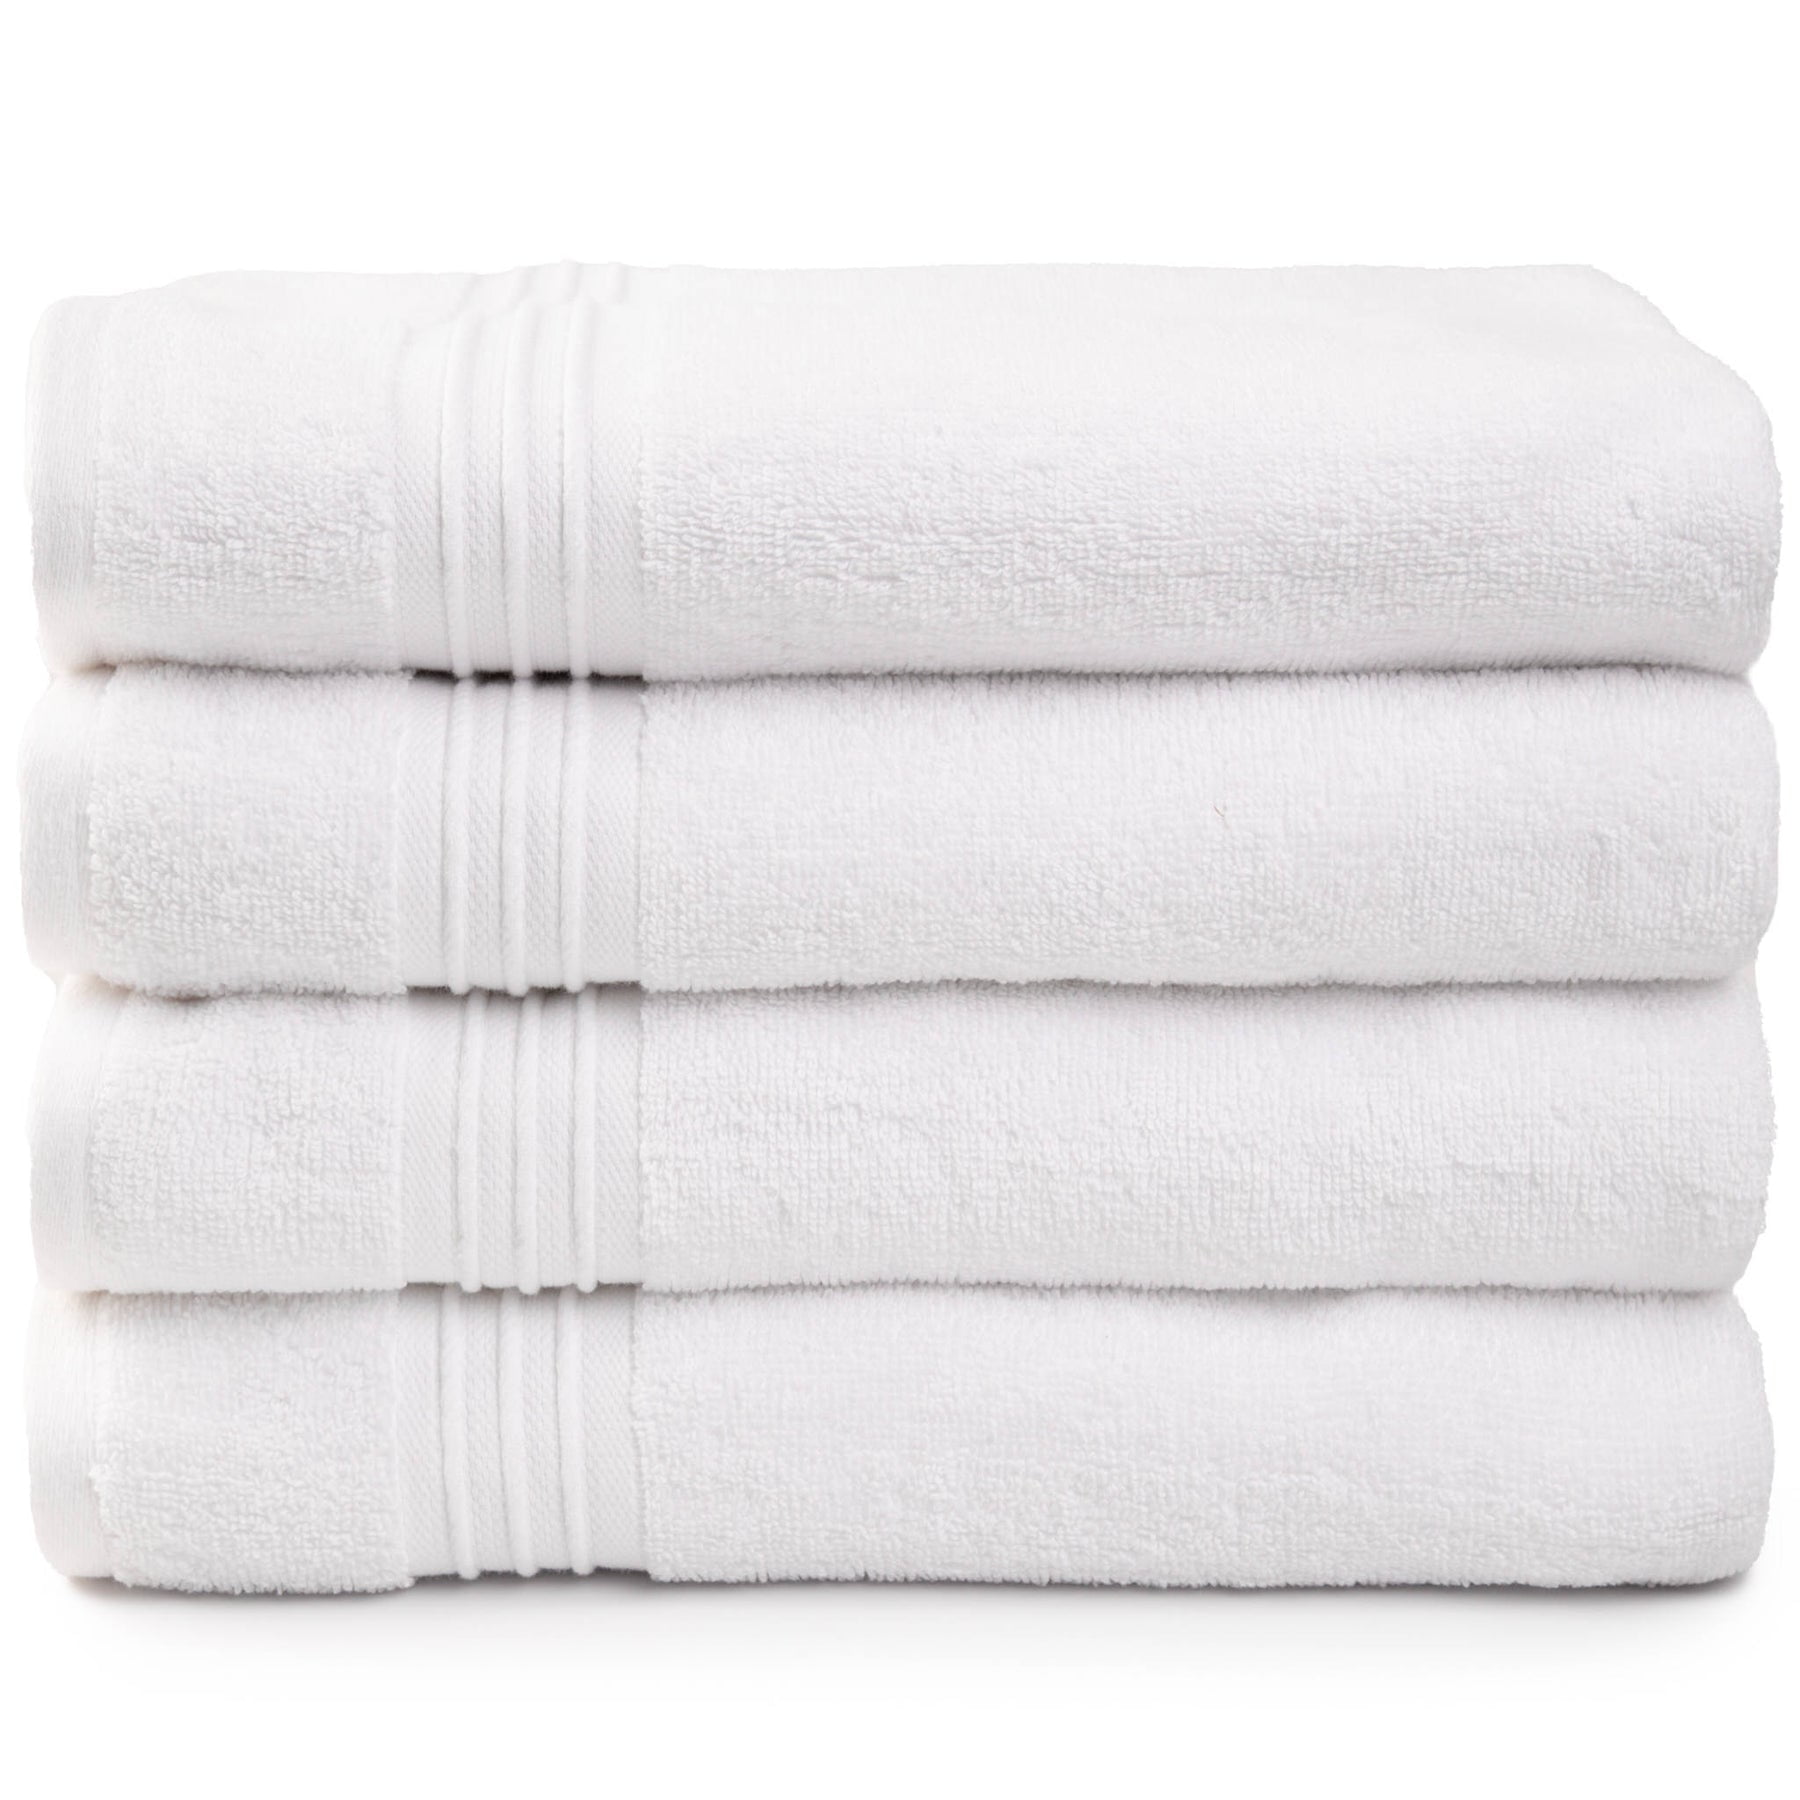 30" x 54" 100% Cotton Extra-Absorbent Bath Towels 6-Pack 